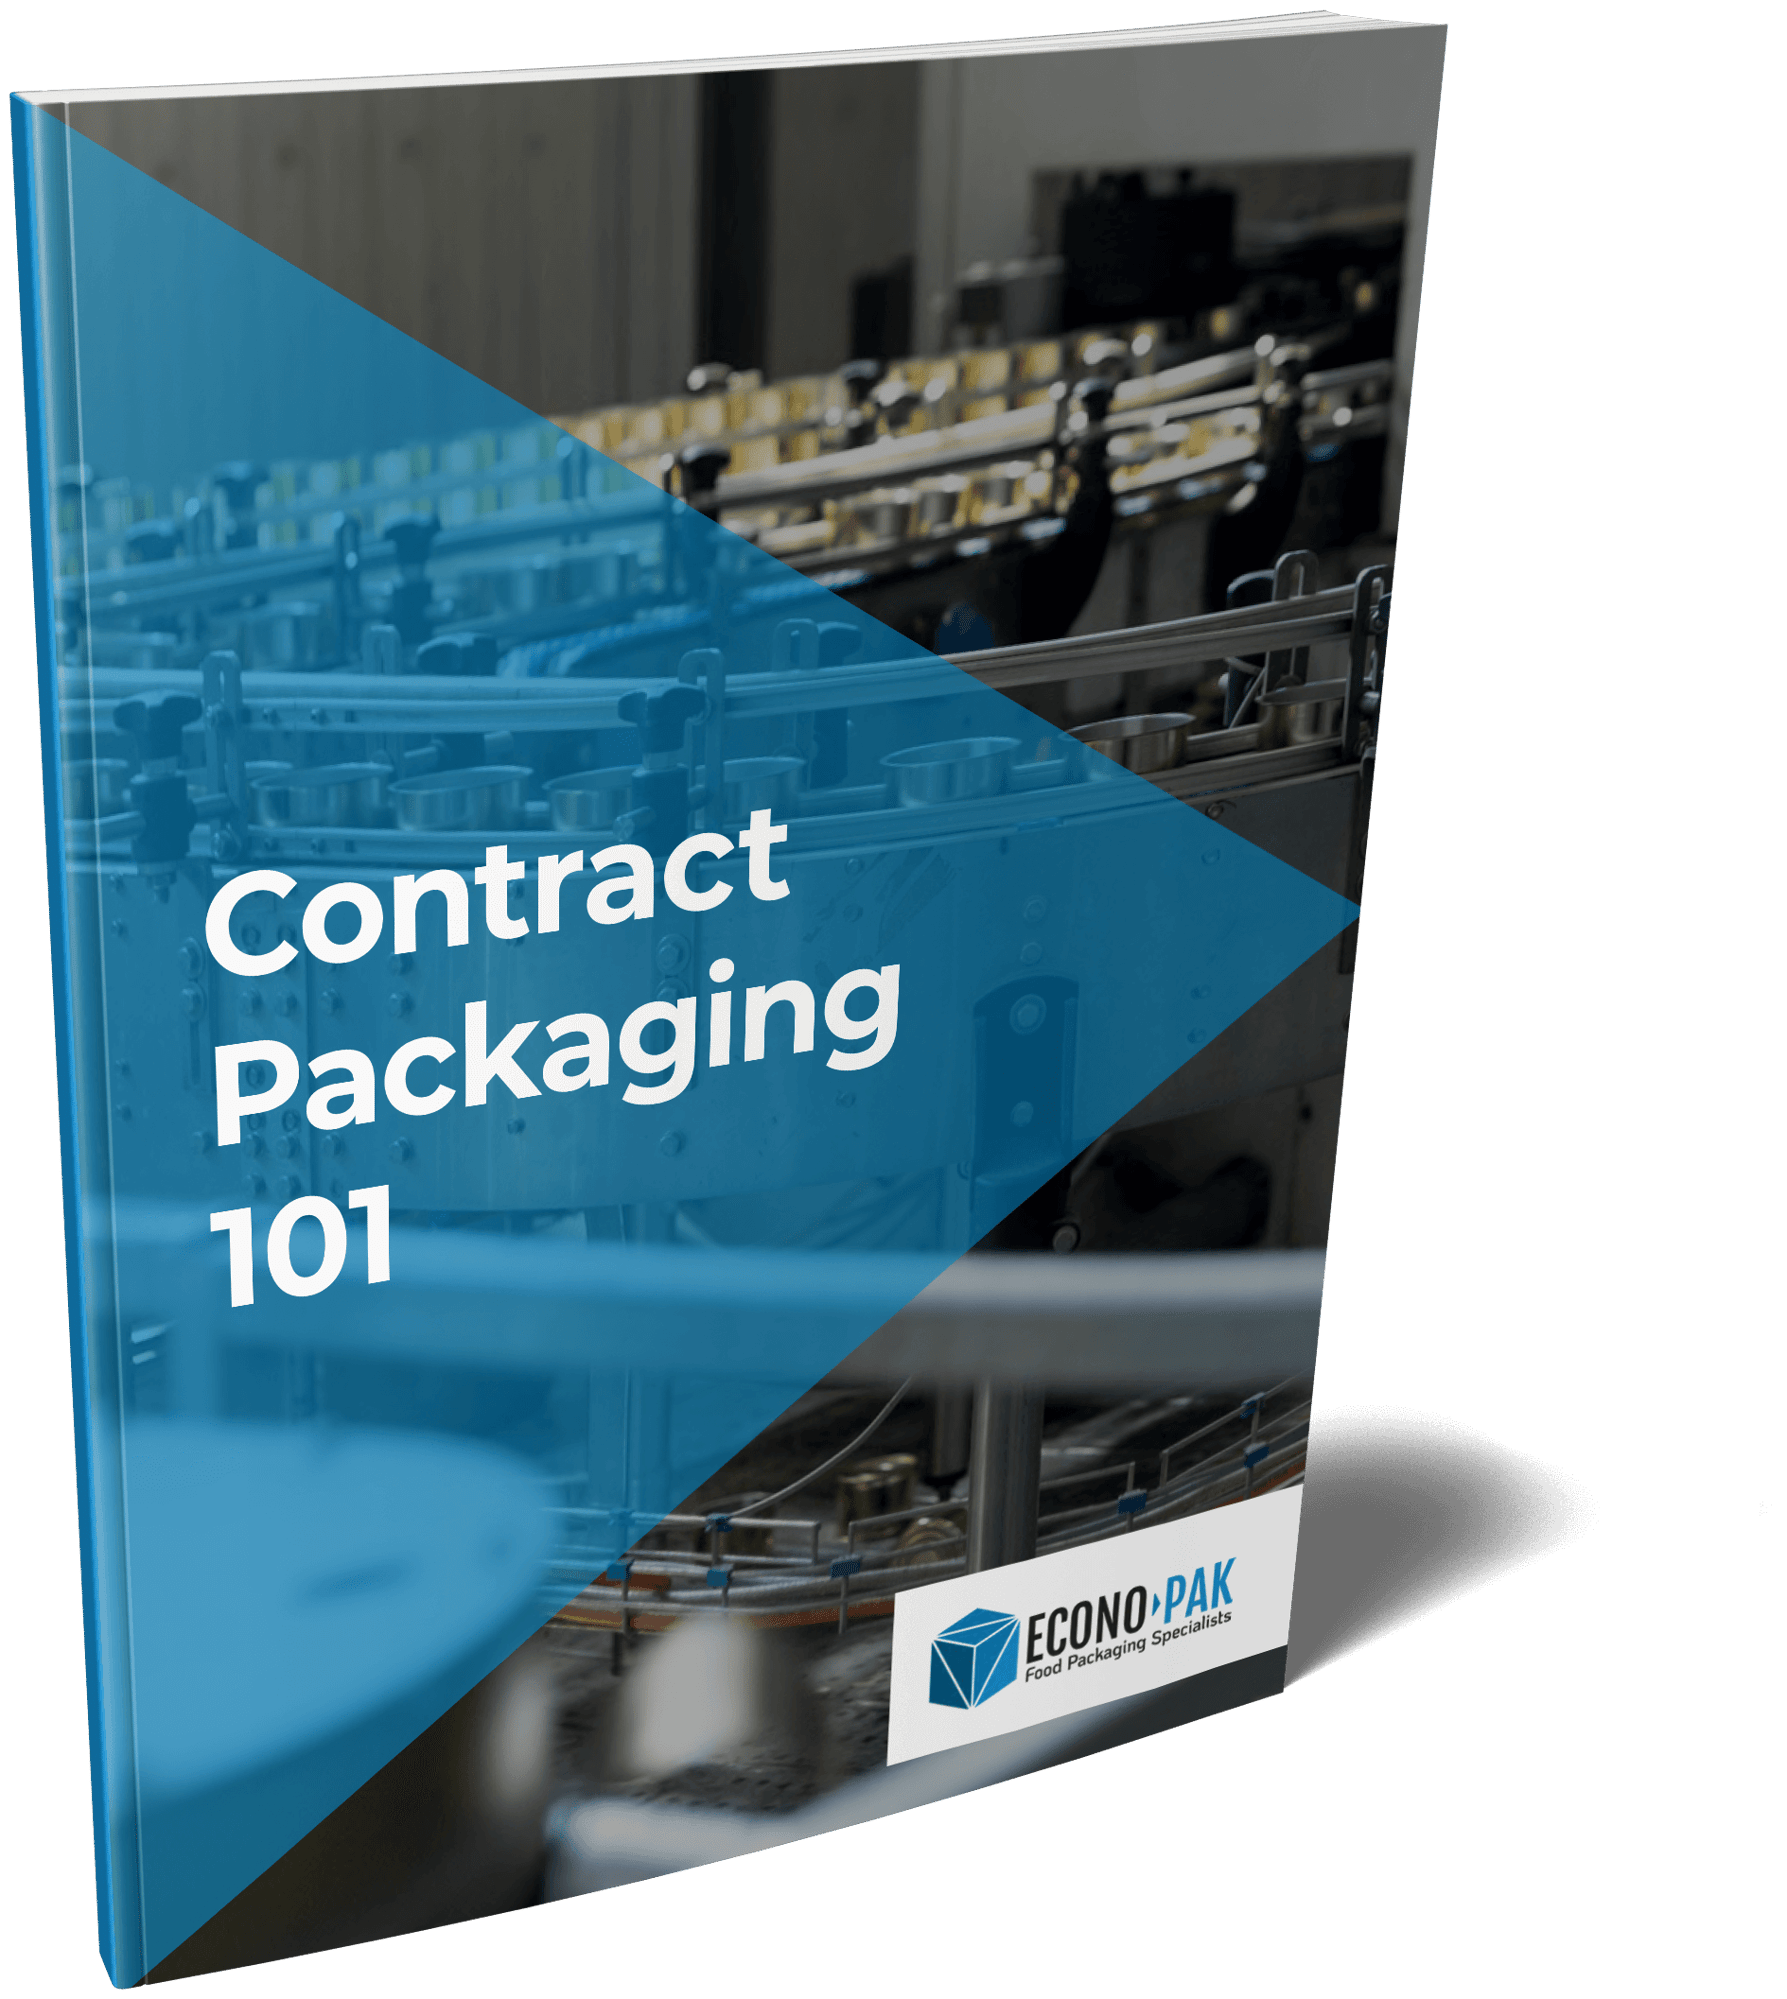 Contract Packaging 101